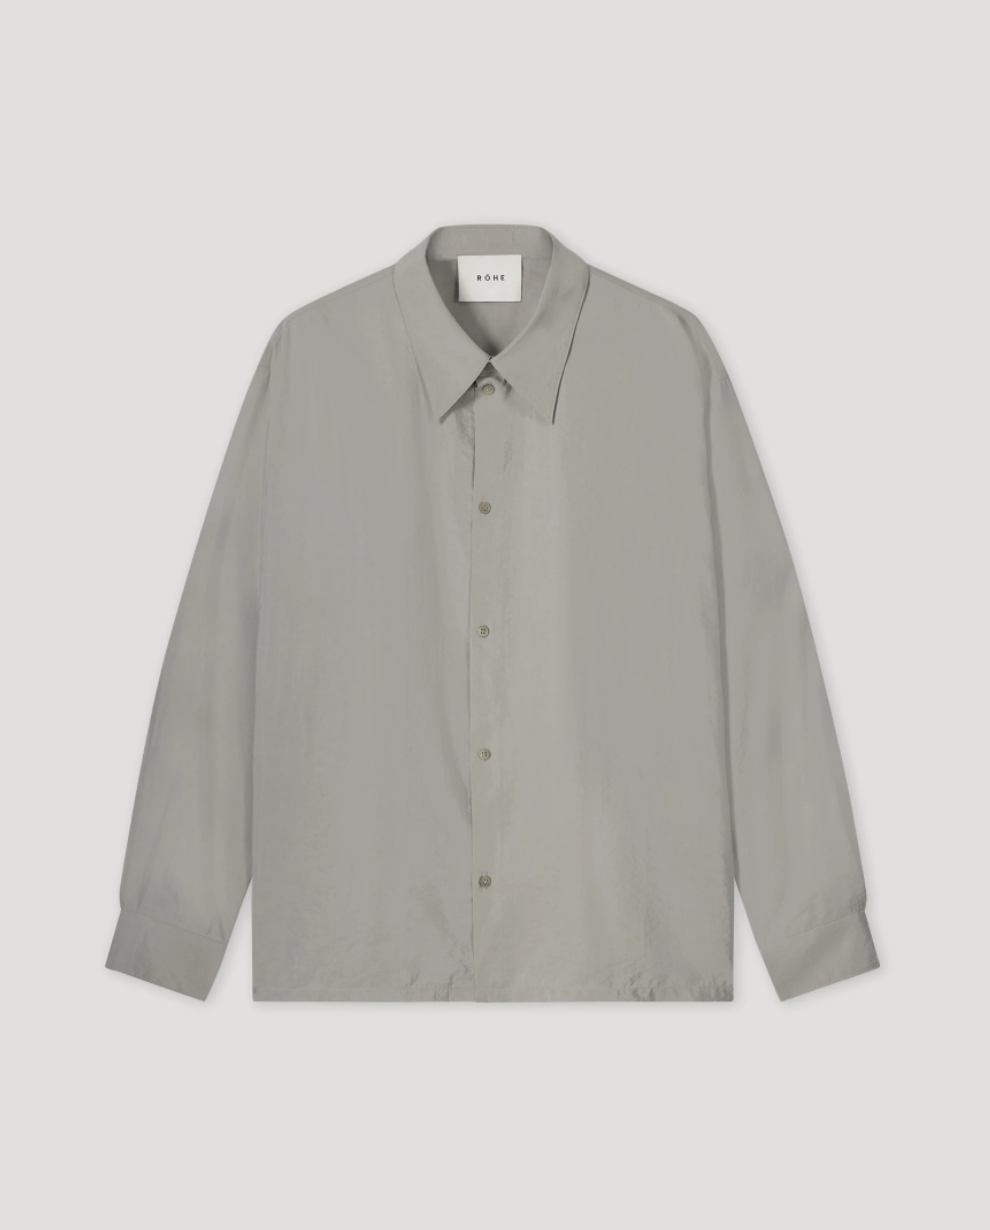 Gintare unisex shirt in light grey by Róhe Frames